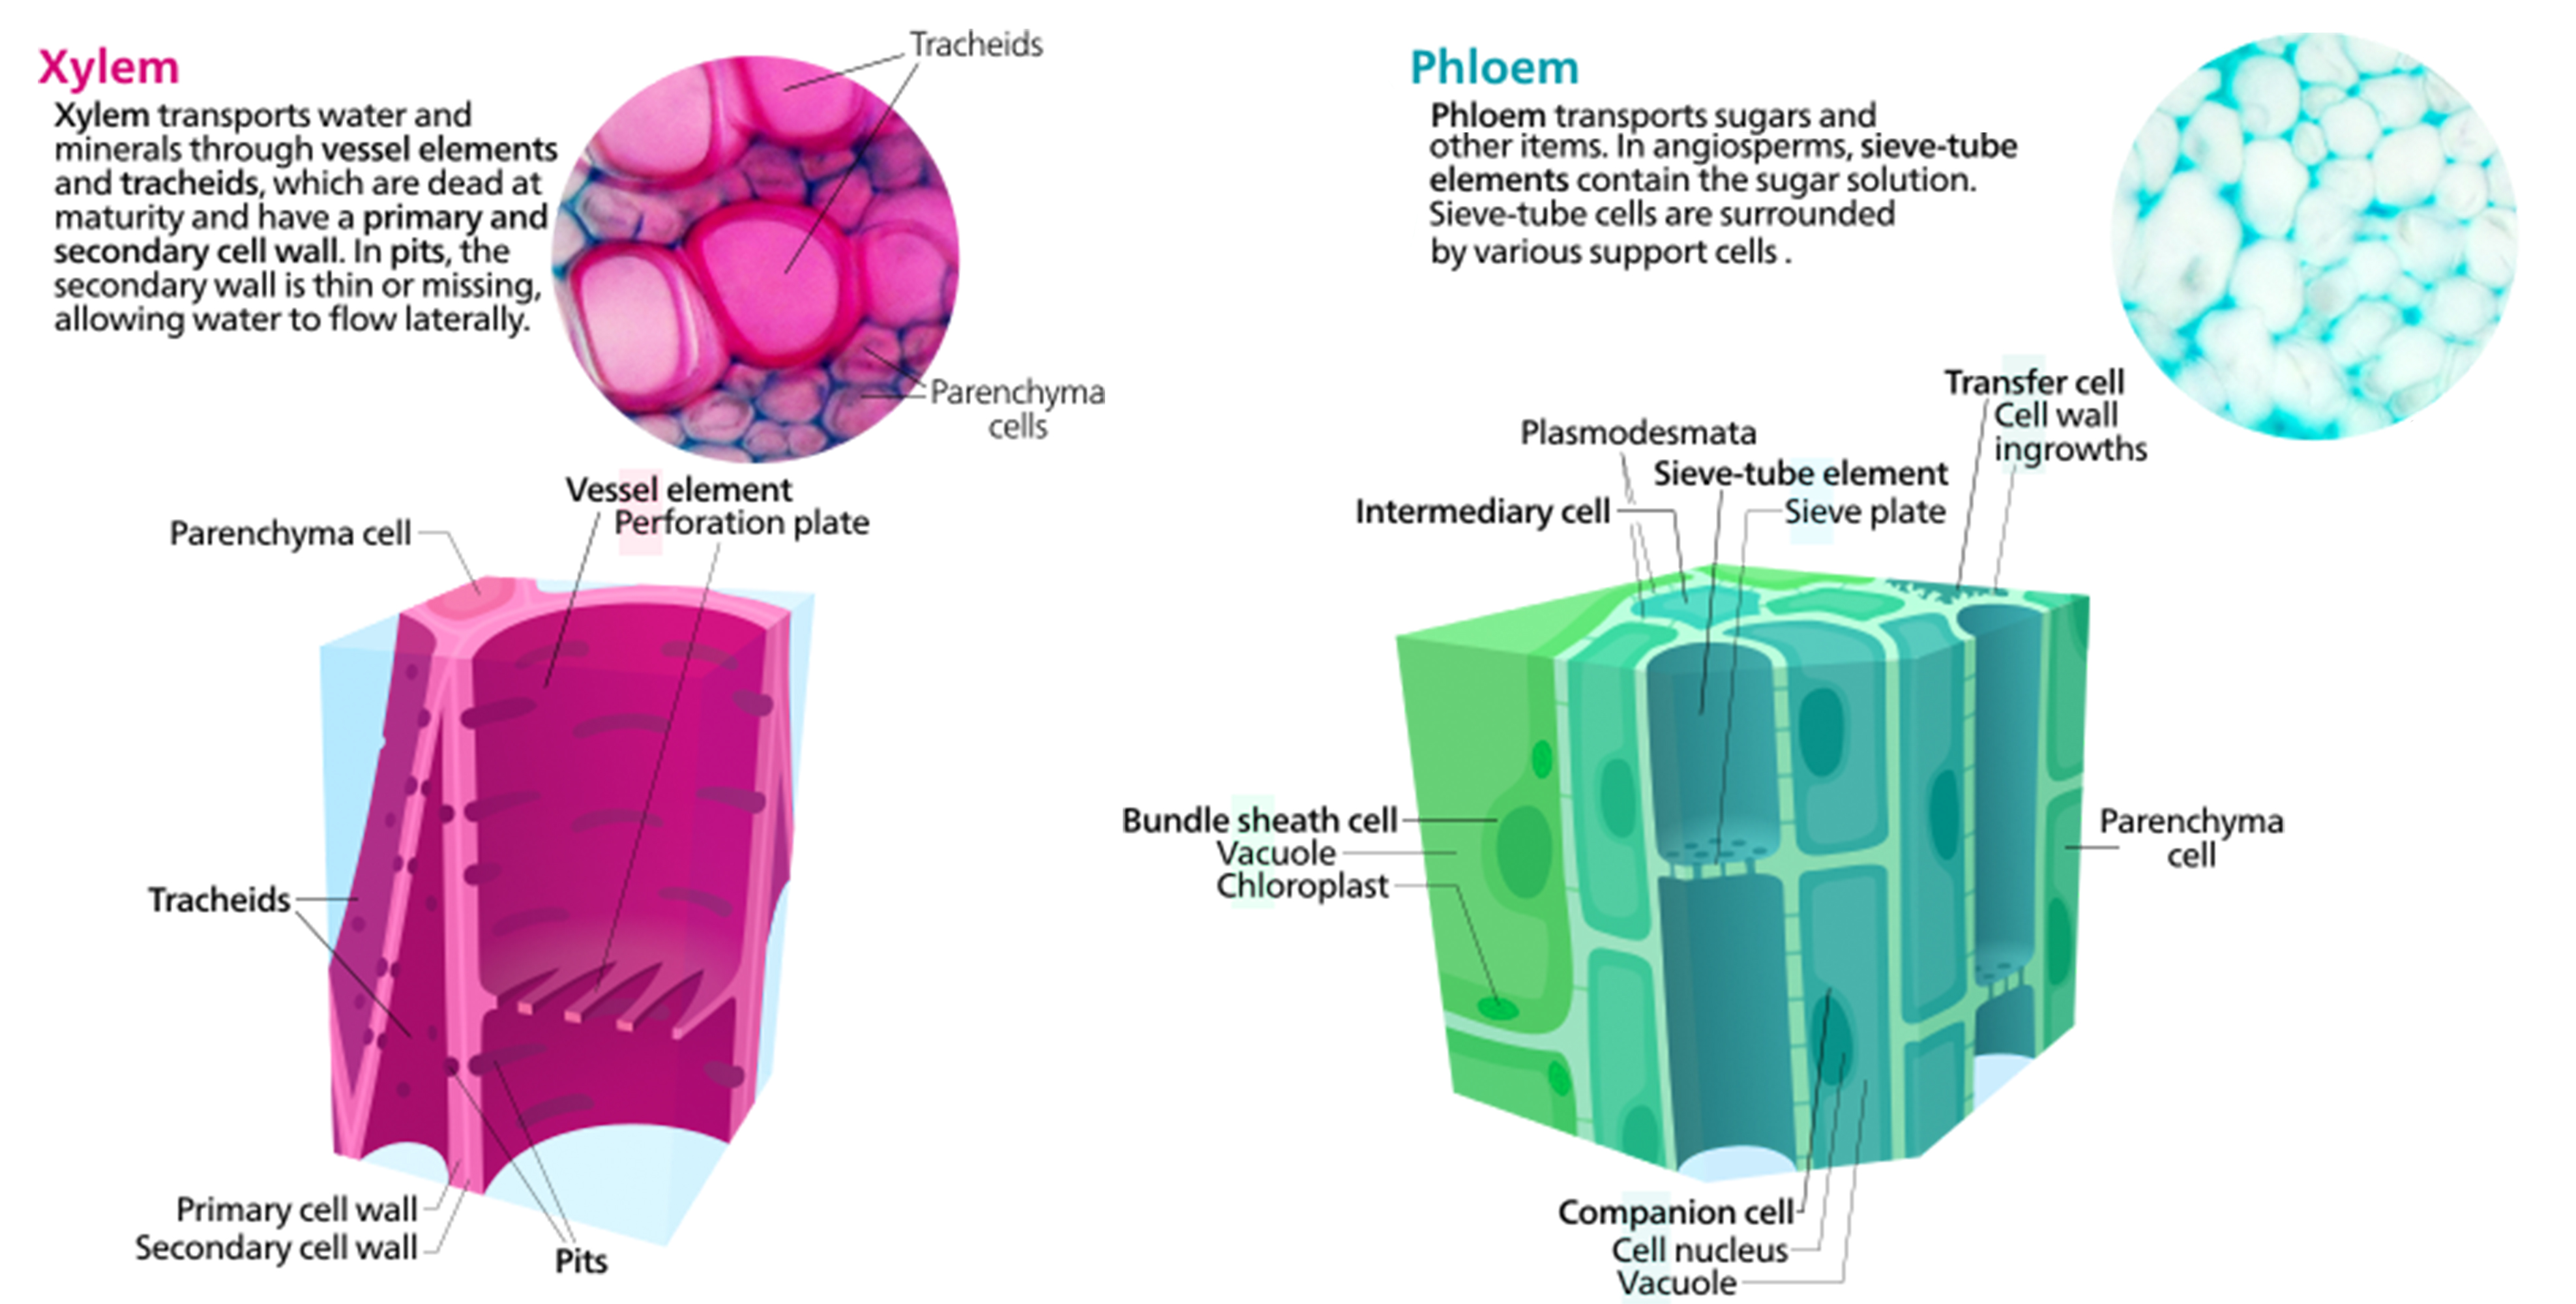 Diagram of the xylem. Xylem transports water and minerals through vessel elements and tracheids, which are dead at maturity and have a primary and secondary wall. In pits, the secondary wall is thin or missing, allowing water to flow laterally. Diagram of the phloem. Phloem transports sugars and other items. In angiosperms, sieve-tube elements contain the sugar solution. Sieve-tube cells are surrounded by various support cells.